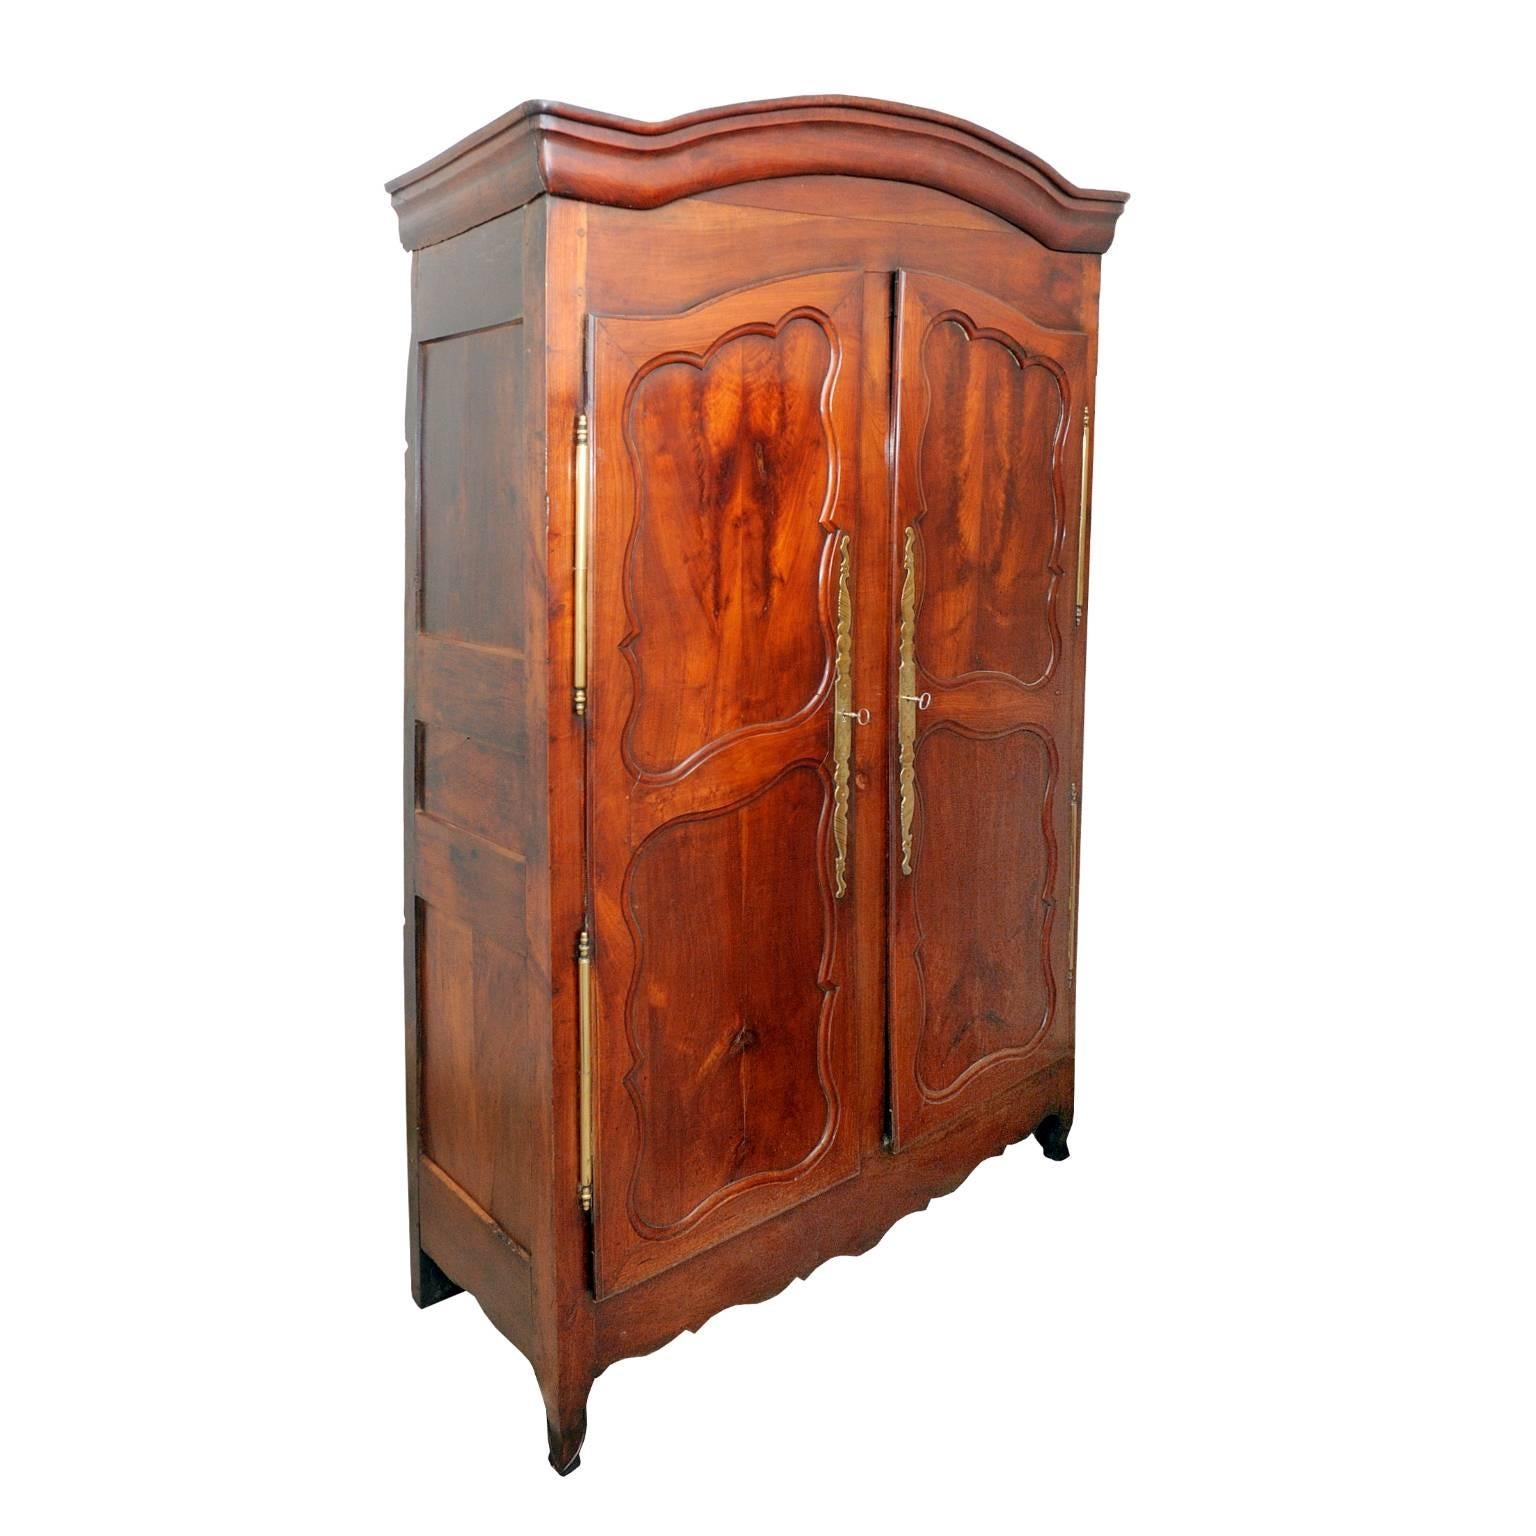 This is a rather beautiful tall French mid-18th century Louis XV cherrywood armoire cupboard with bonnet top, decorative shaped panels and original brass door furniture and locks. Fitted interior, including three fixed shelves and a single